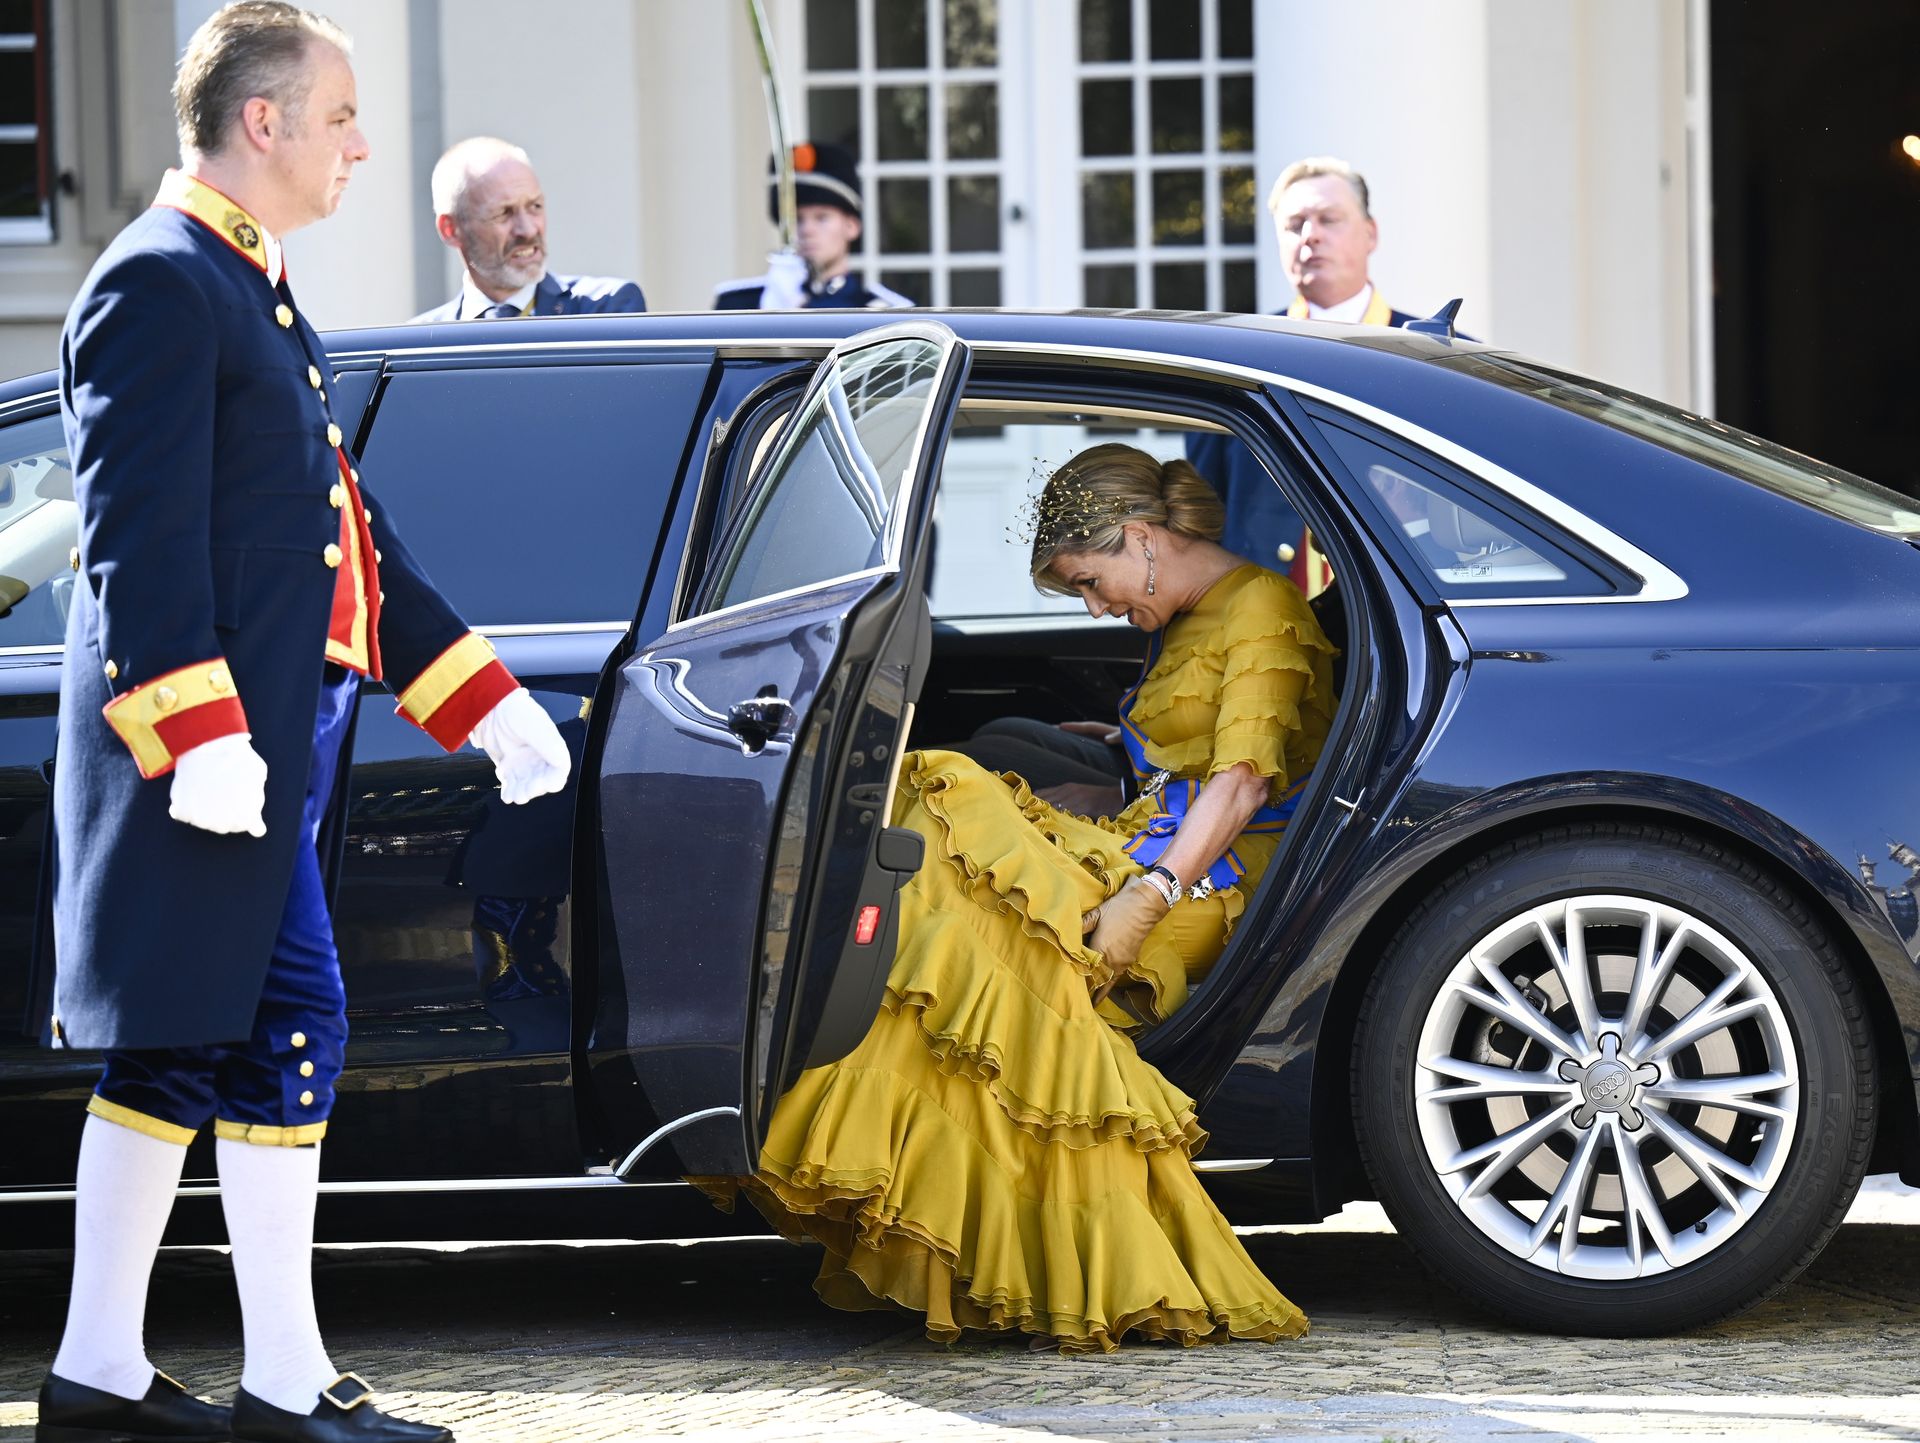 Maxima car on Prince's Day